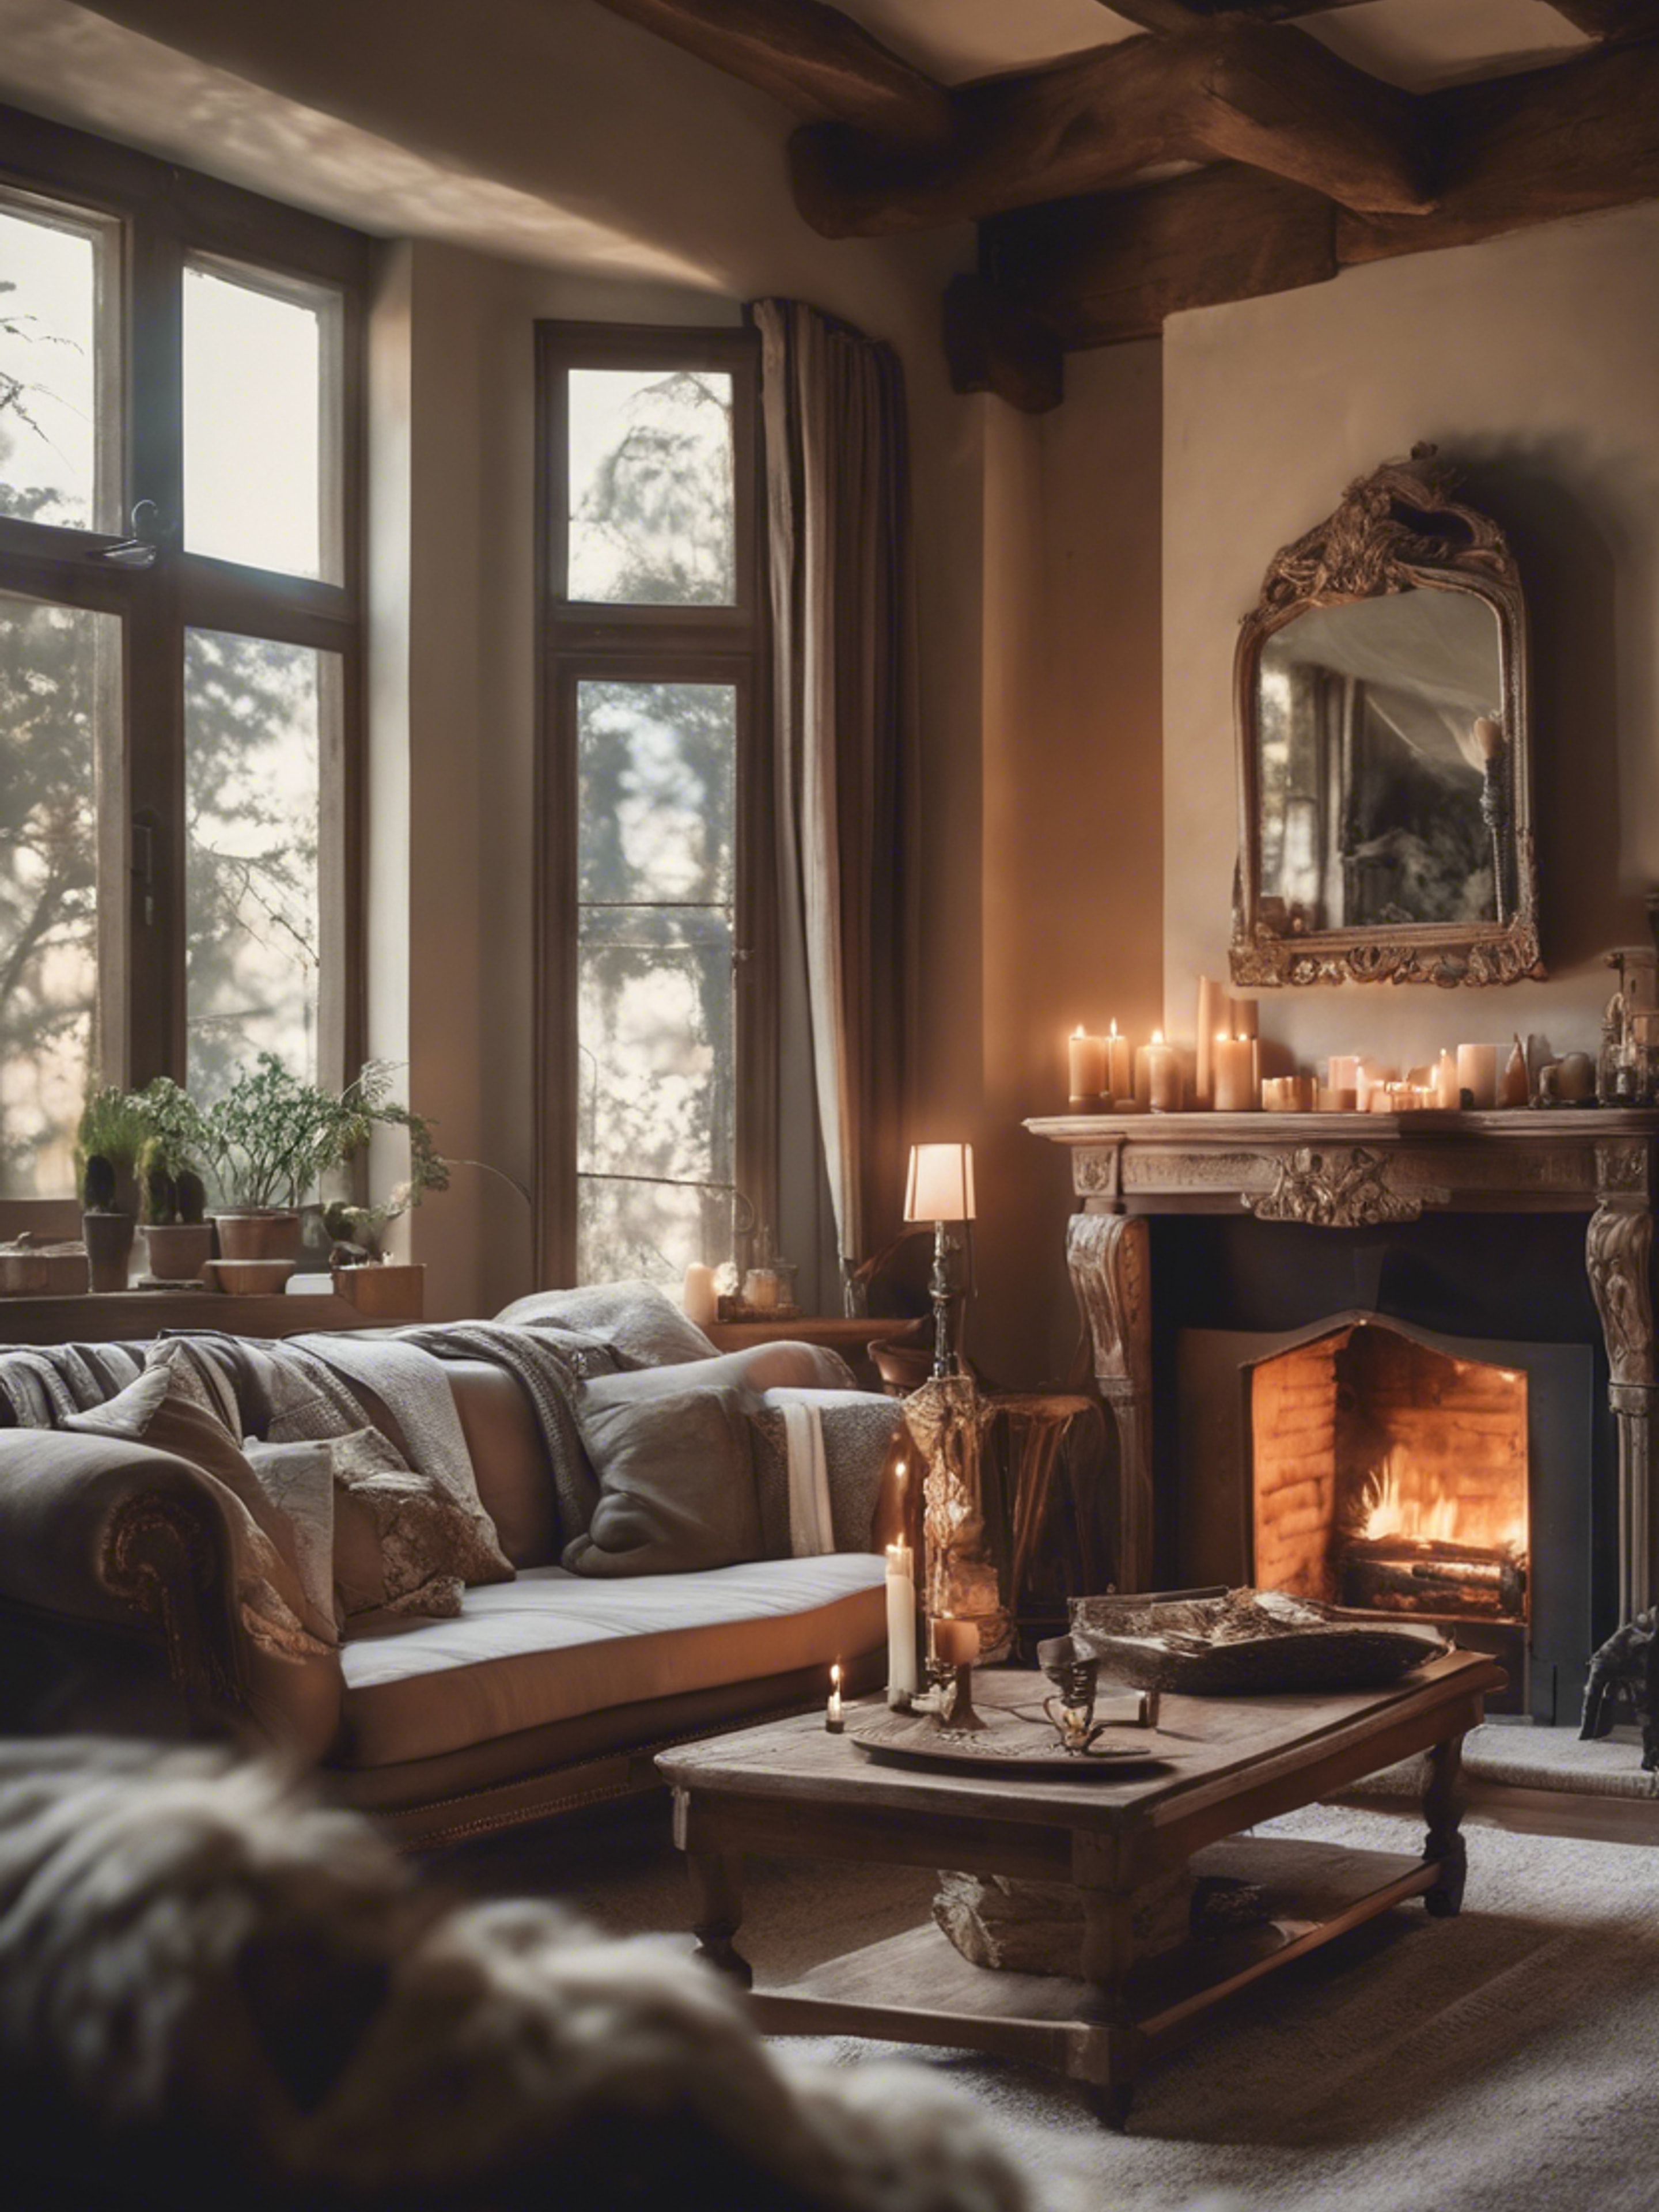 A French country style living room, cozy and comfortable with a roaring fireplace, antique furniture, and soft candlelight. Papel de parede[b1f658778f85425ba676]